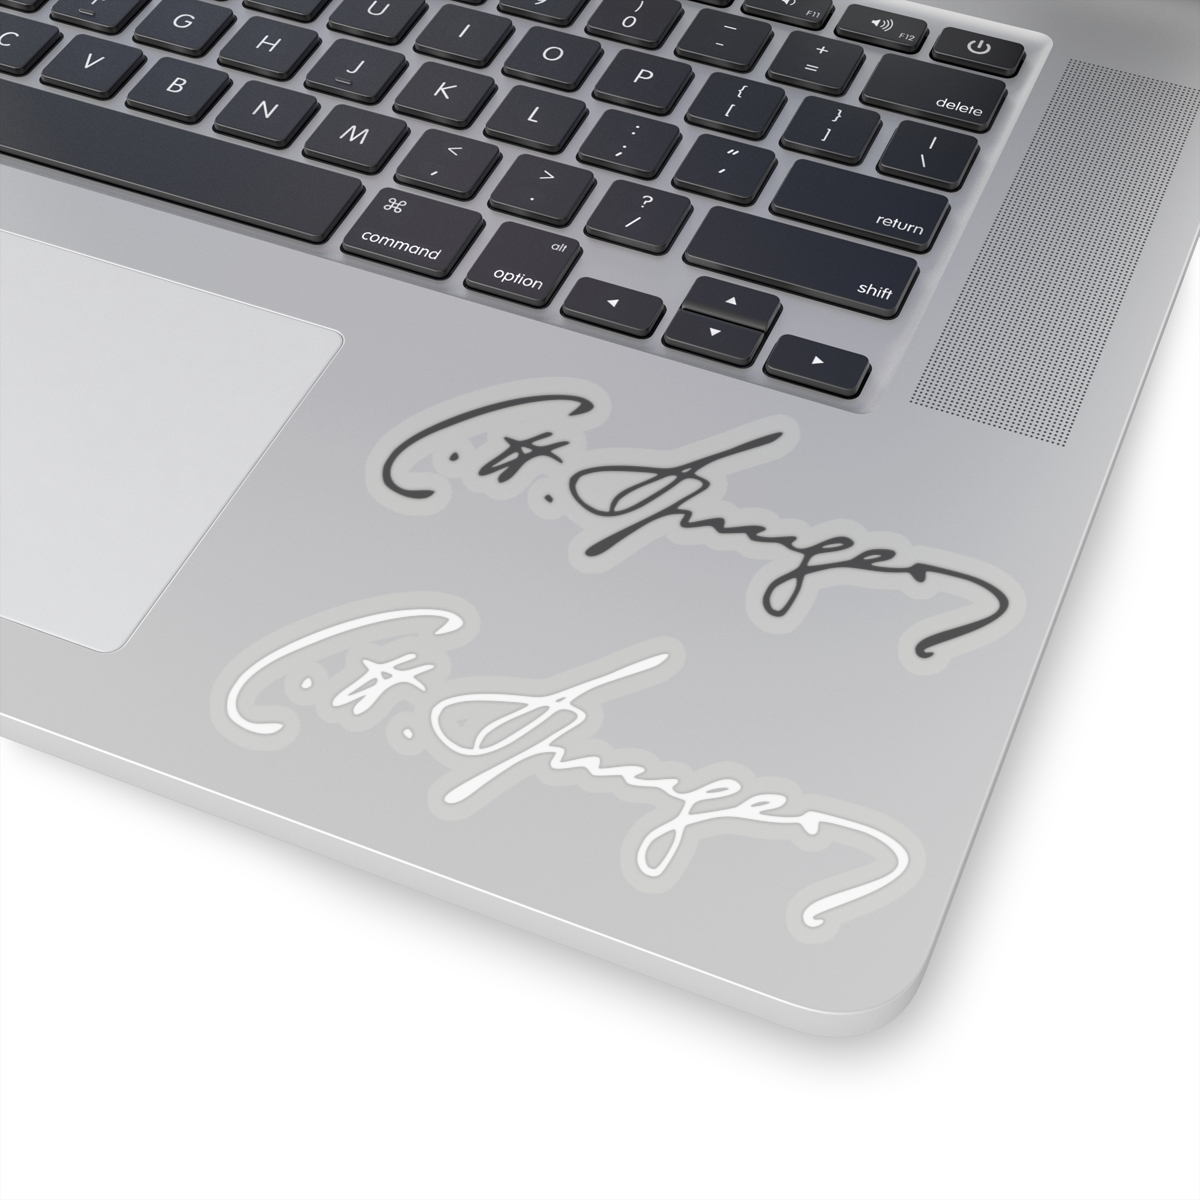 Spurgeon Signature Stickers product thumbnail image